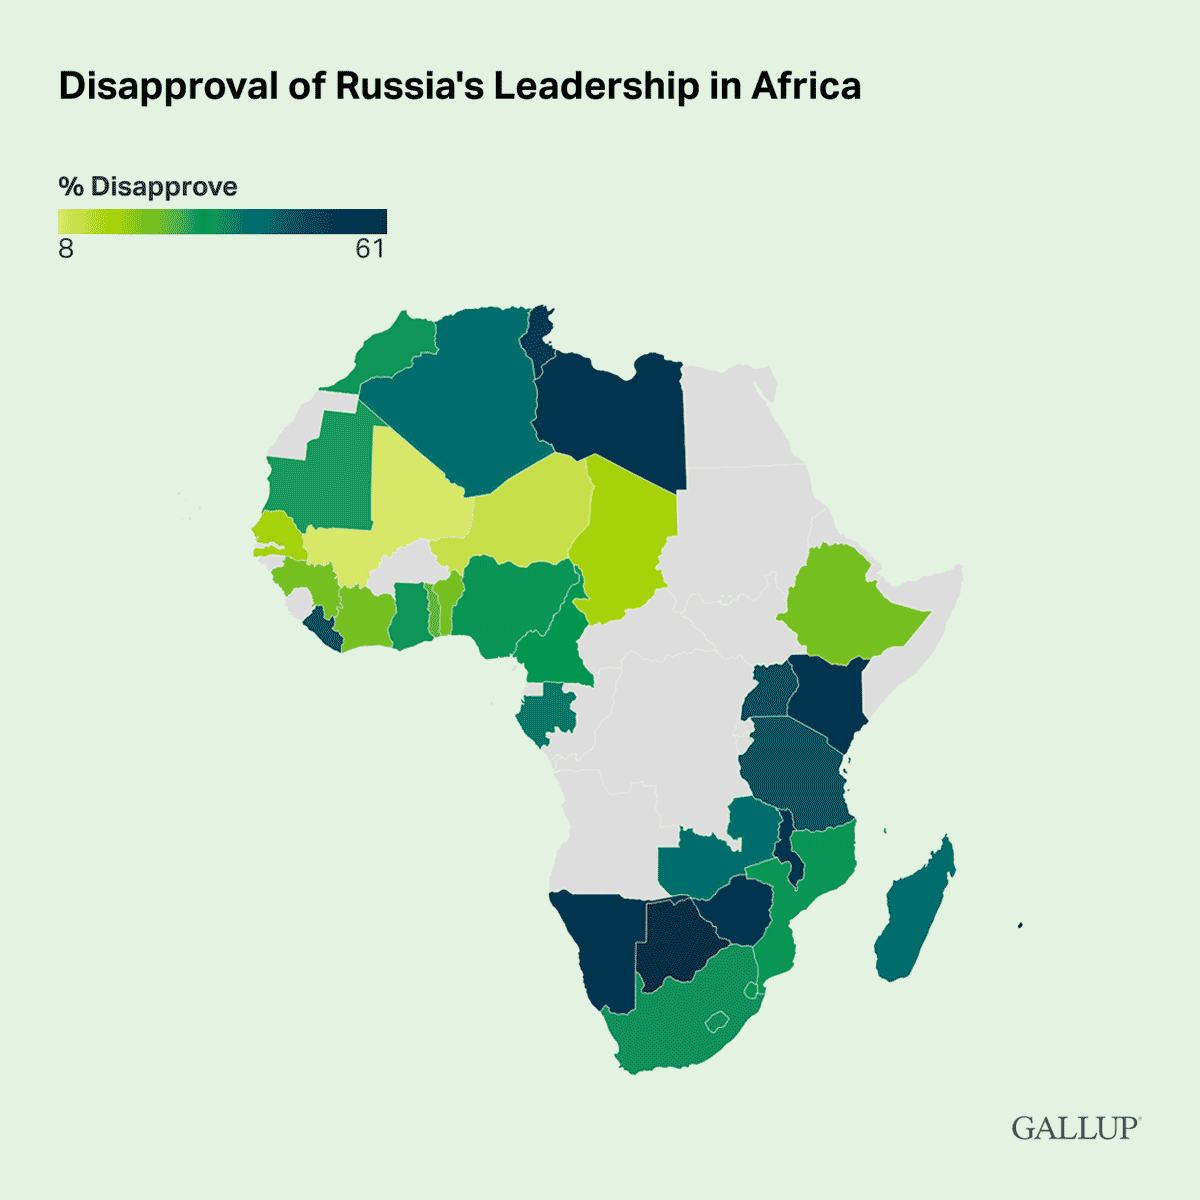 Map: Disapproval of Russian leadership among African nations.